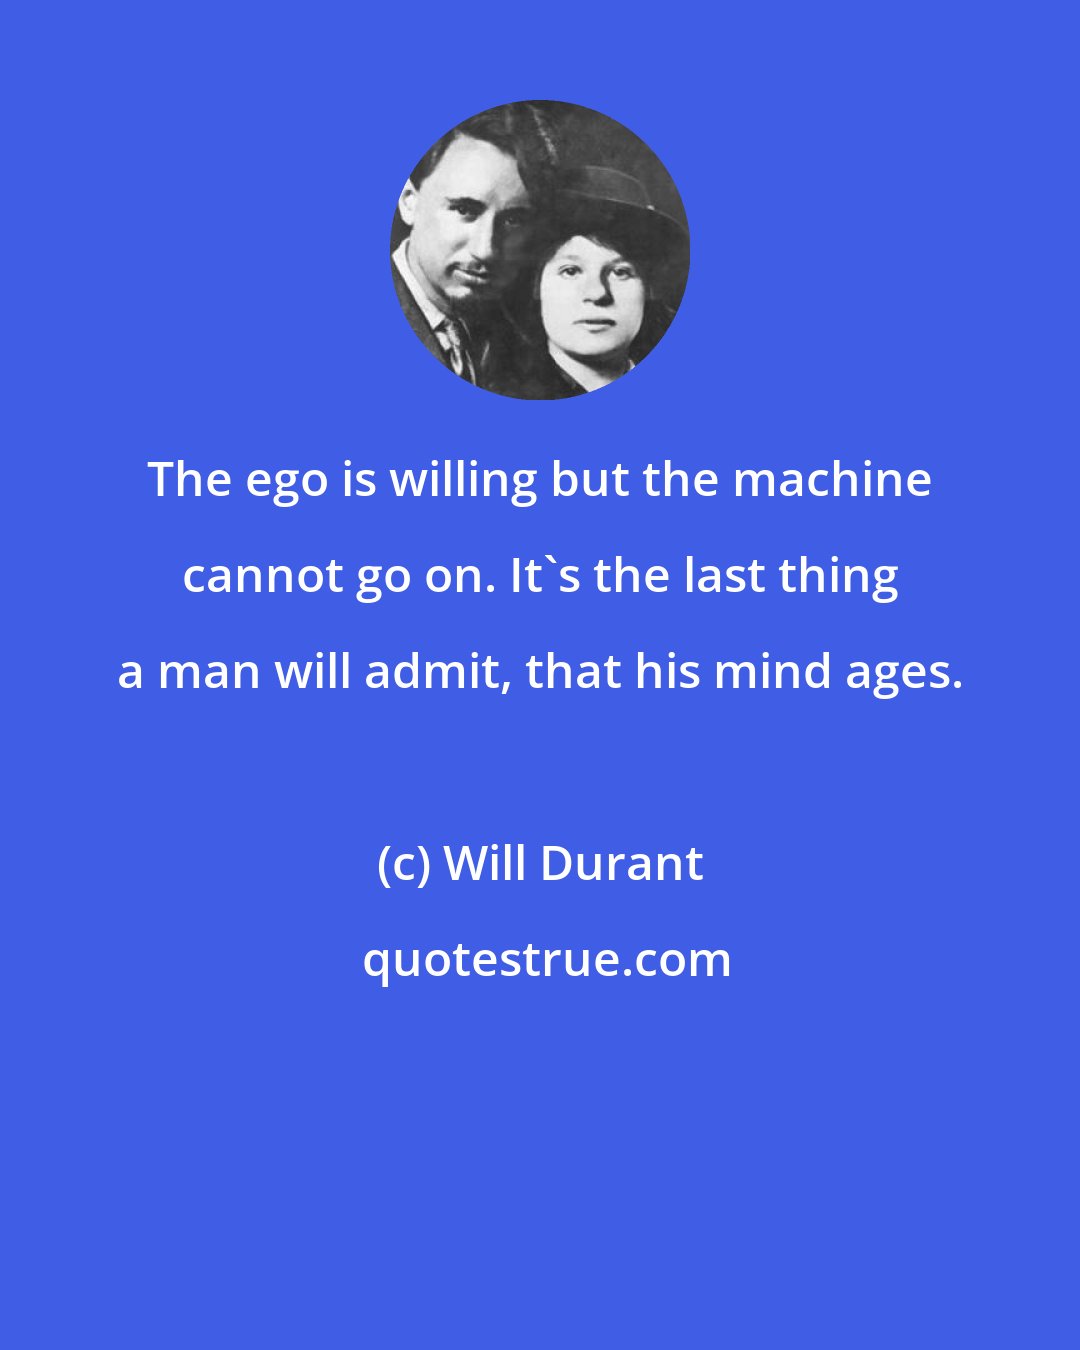 Will Durant: The ego is willing but the machine cannot go on. It's the last thing a man will admit, that his mind ages.